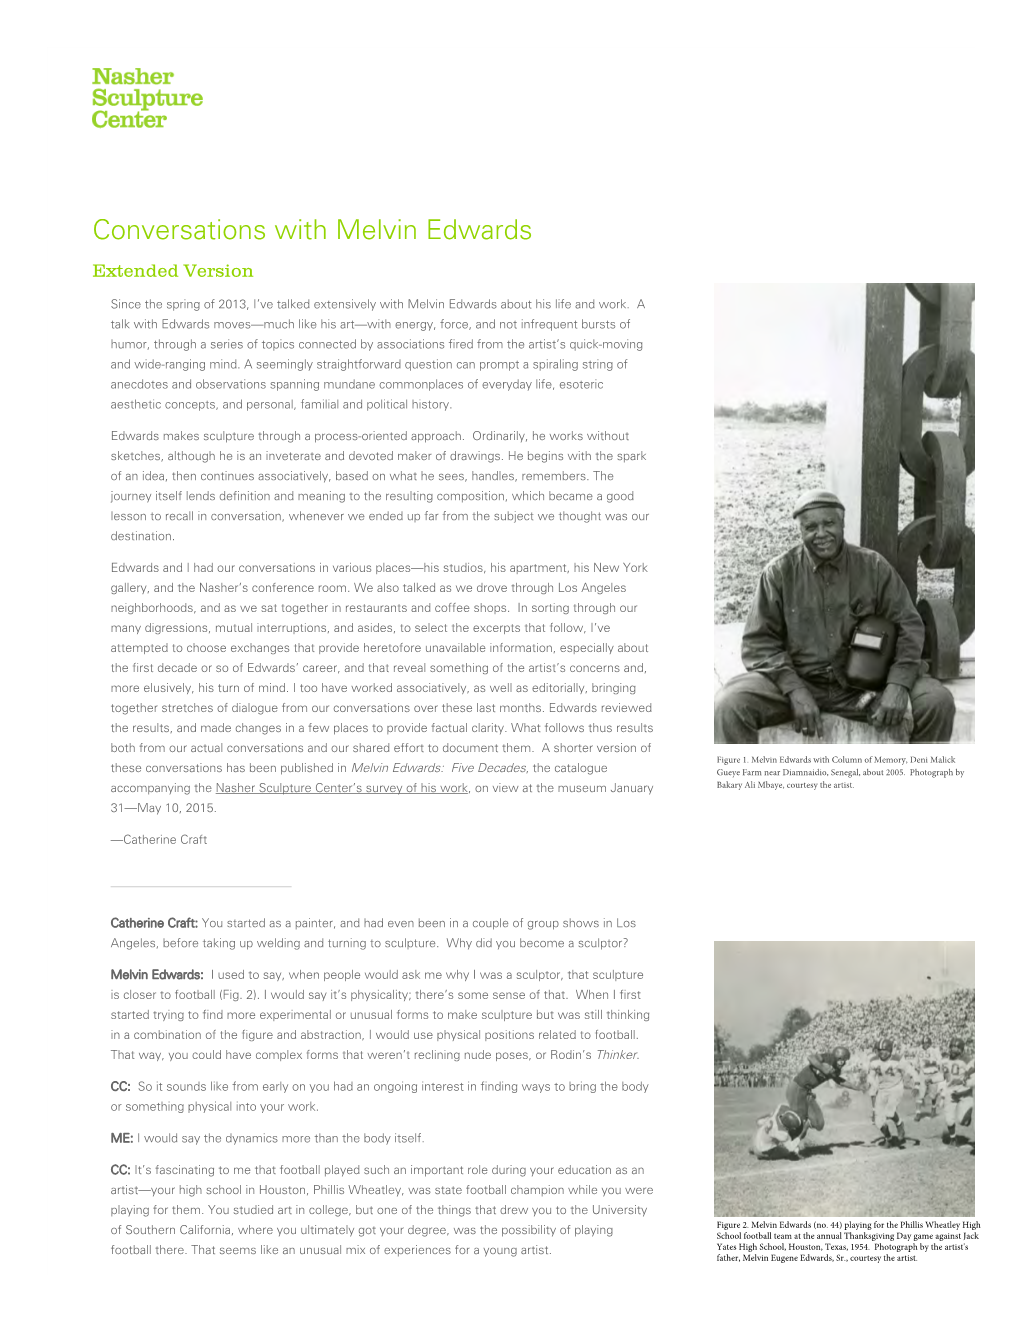 Conversations with Melvin Edwards Extended Version